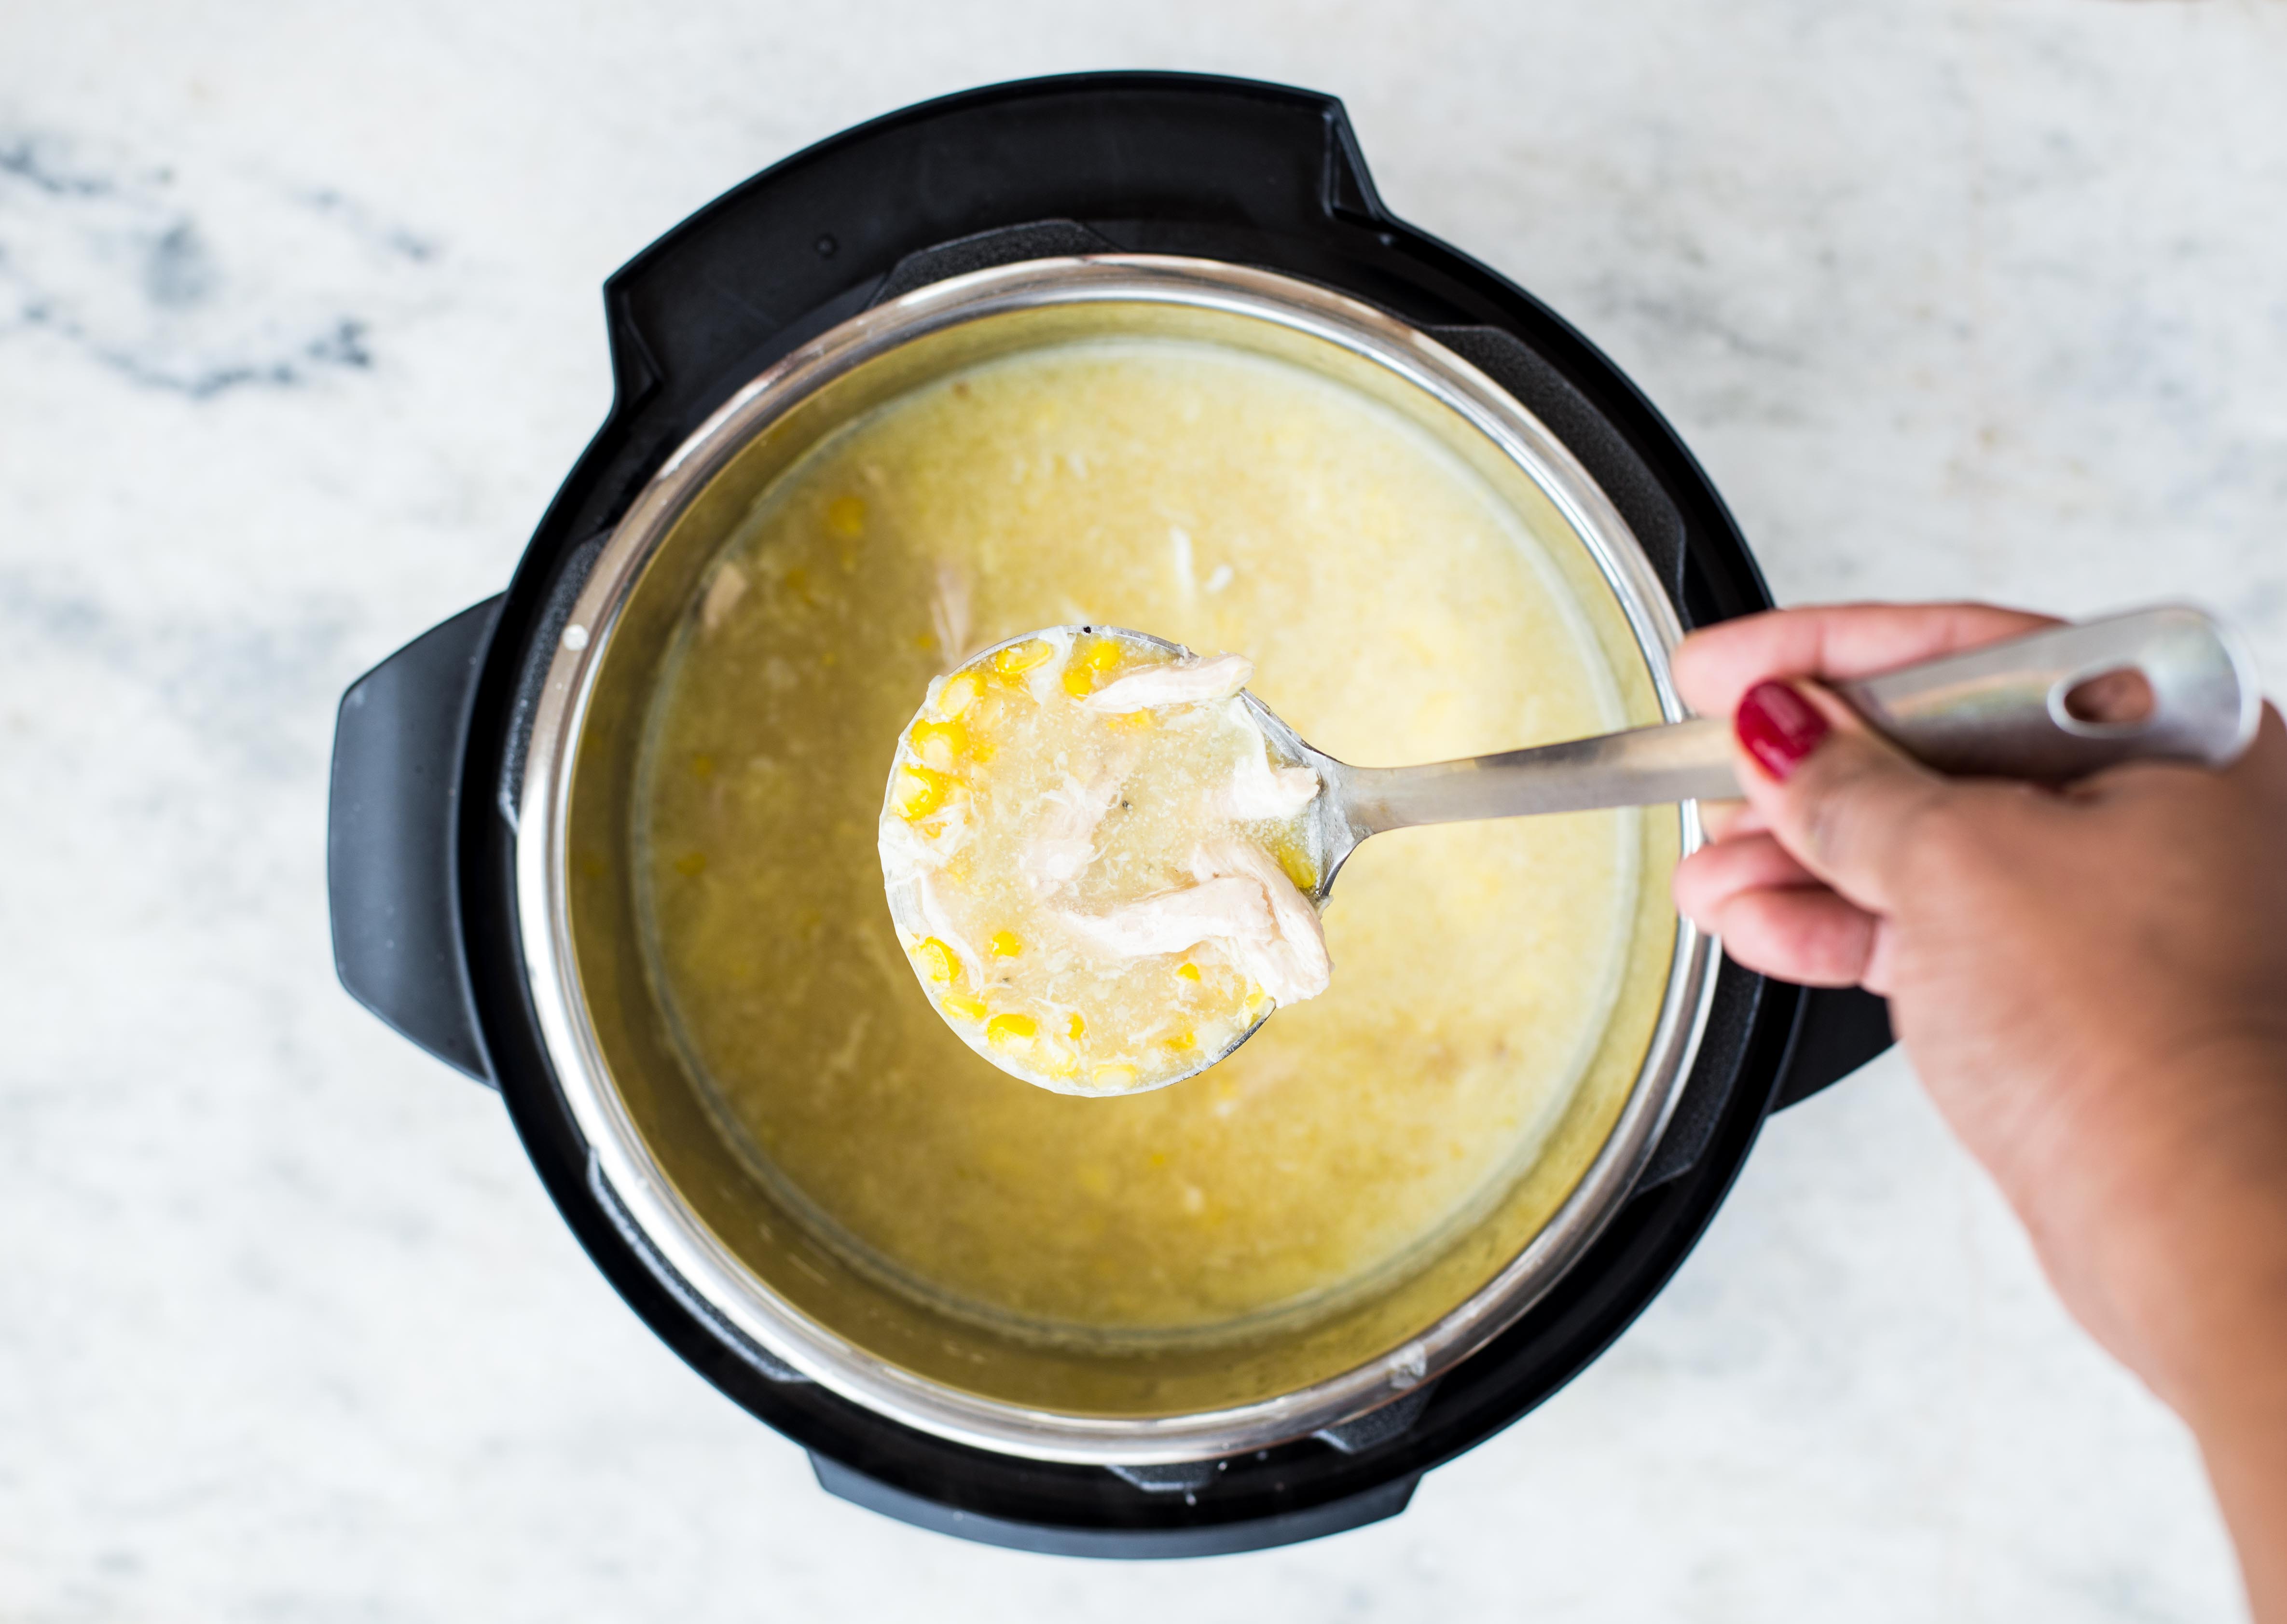 Thick and Creamy Sweet Corn Chicken Soup is an Indo-Chinese Soup that takes just 20 minutes to make. Watch the detailed video to learn how to make this easy Corn Chicken soup in an Instant Pot from scratch. Stove Top instructions also included in case if you don't have an Instant Pot.